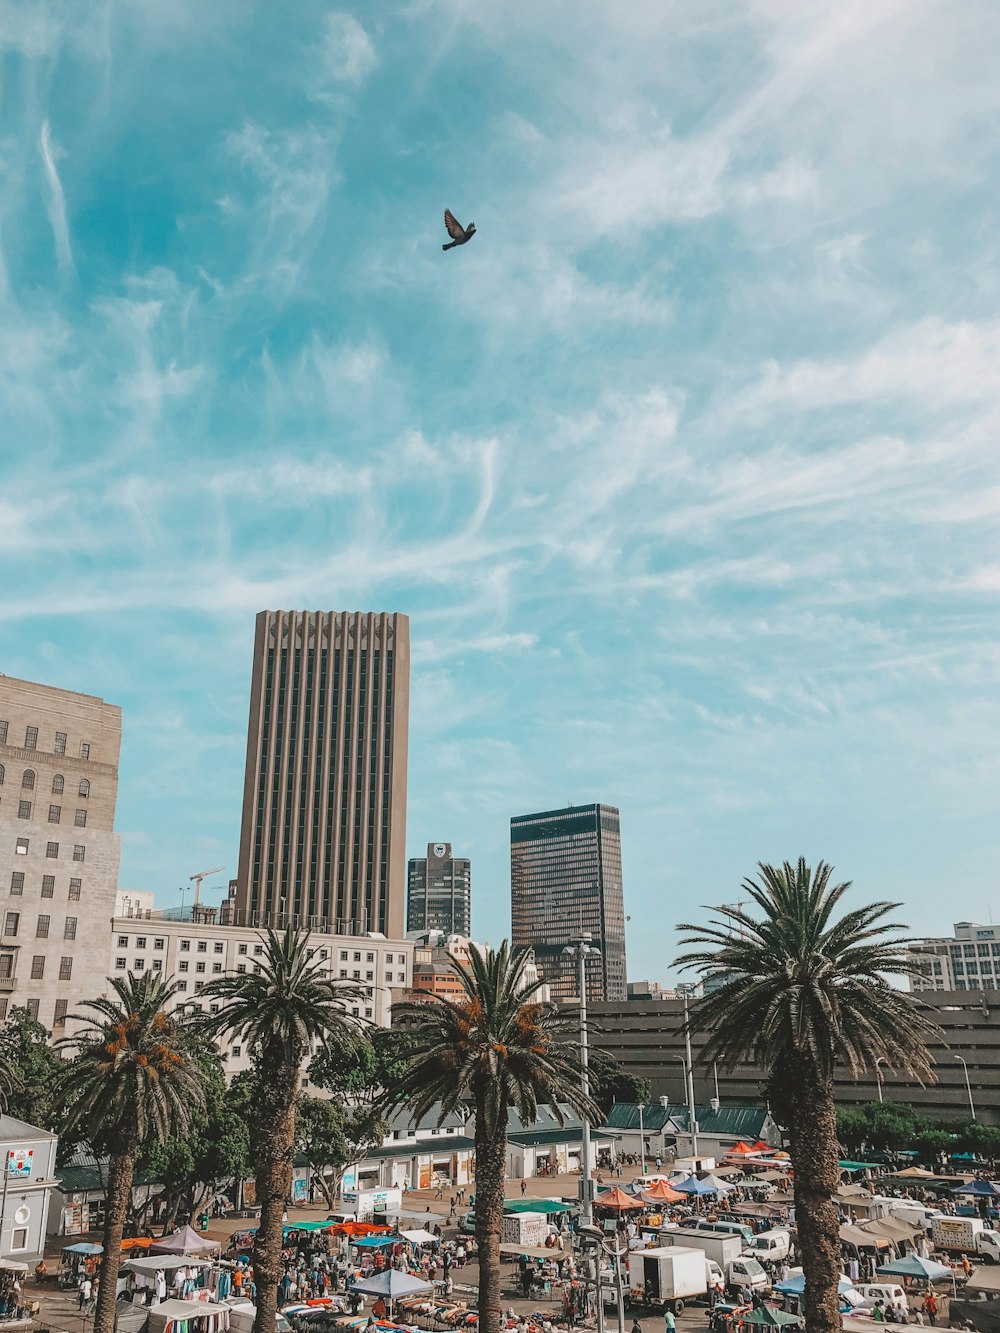 a bird flying over a city with palm trees